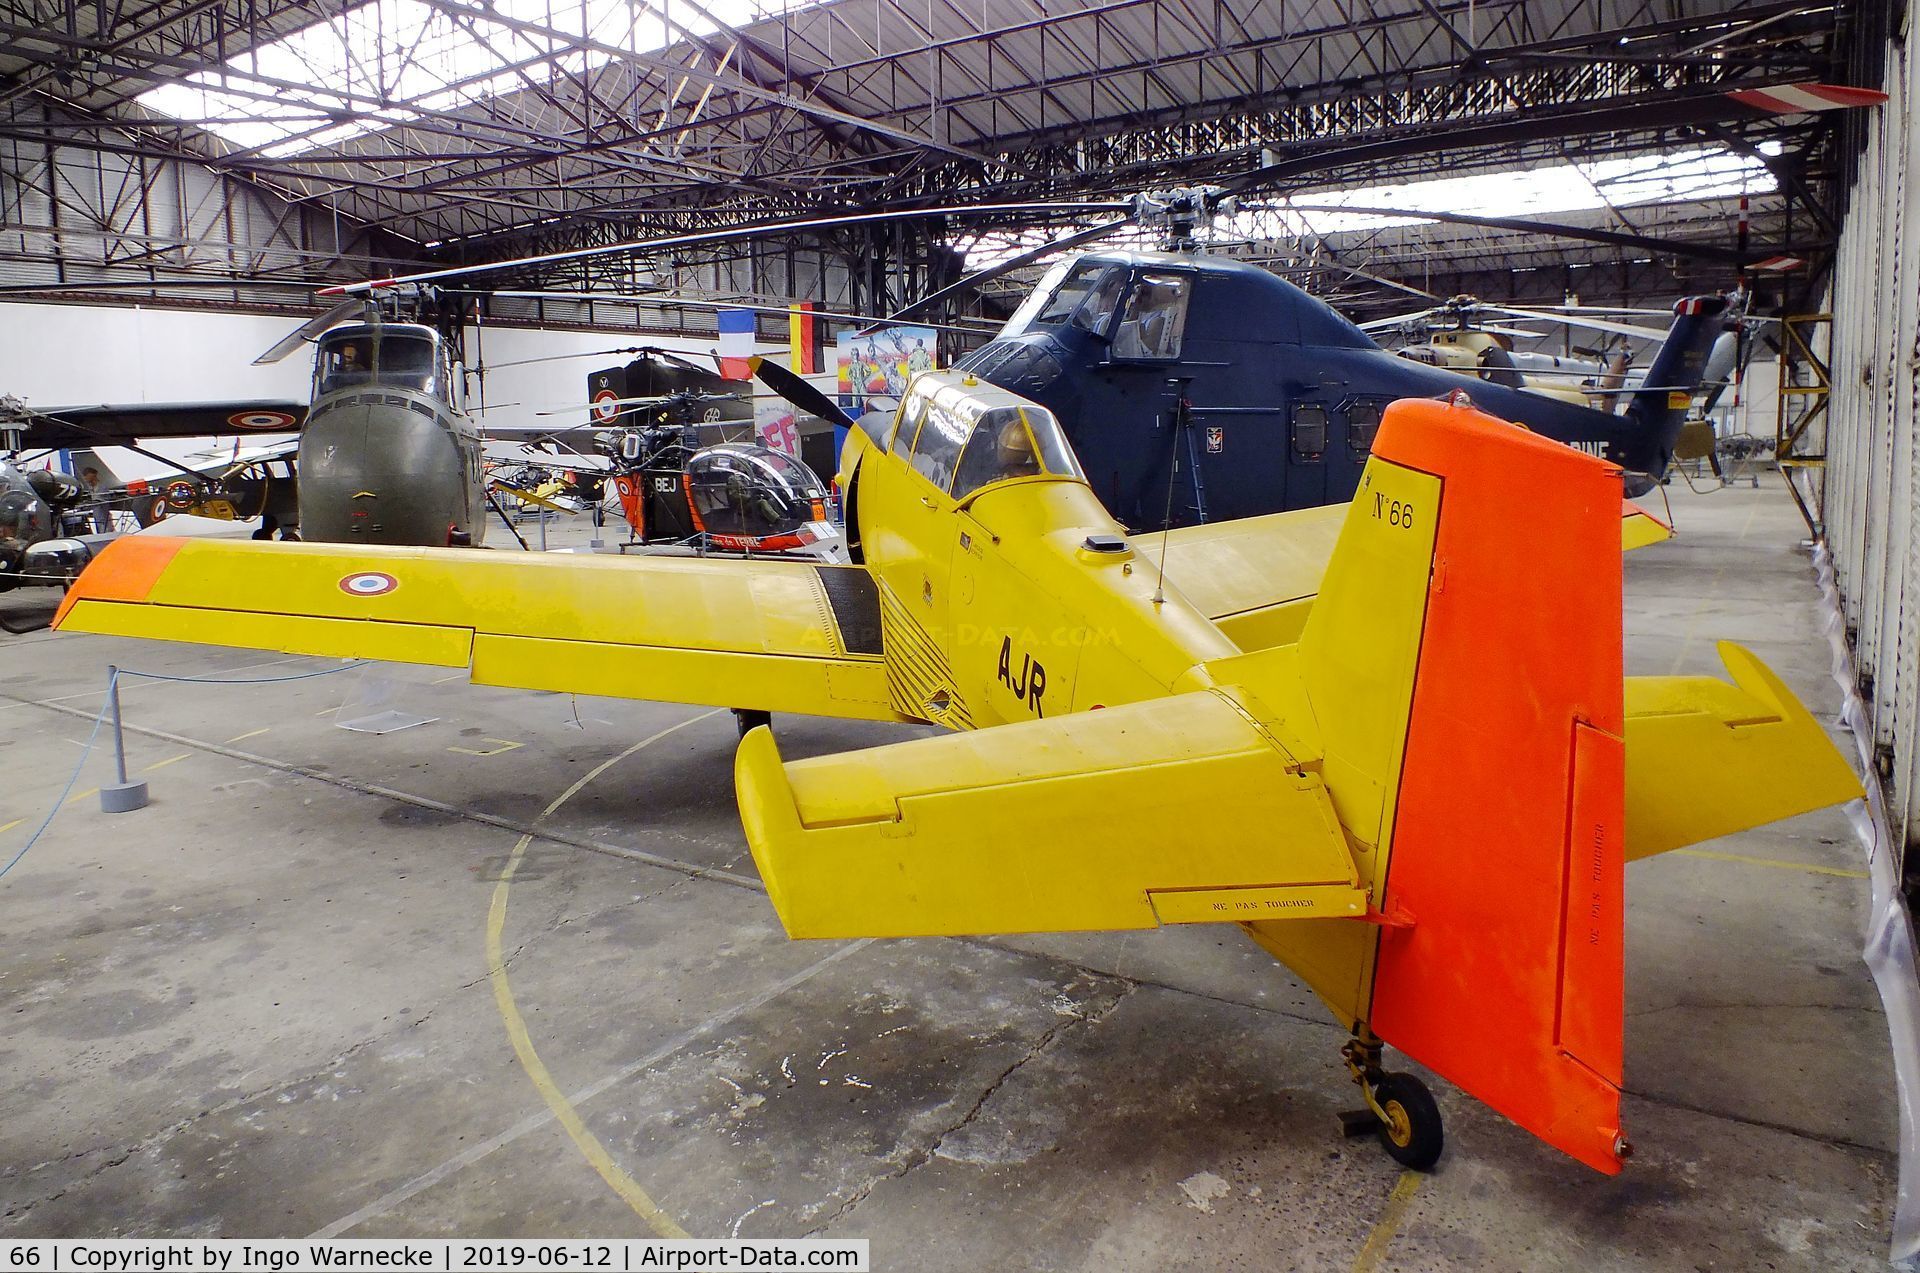 66, Nord 3202 Master C/N 66, Nord N.3202B at the Musee de l'ALAT et de l'Helicoptere, Dax